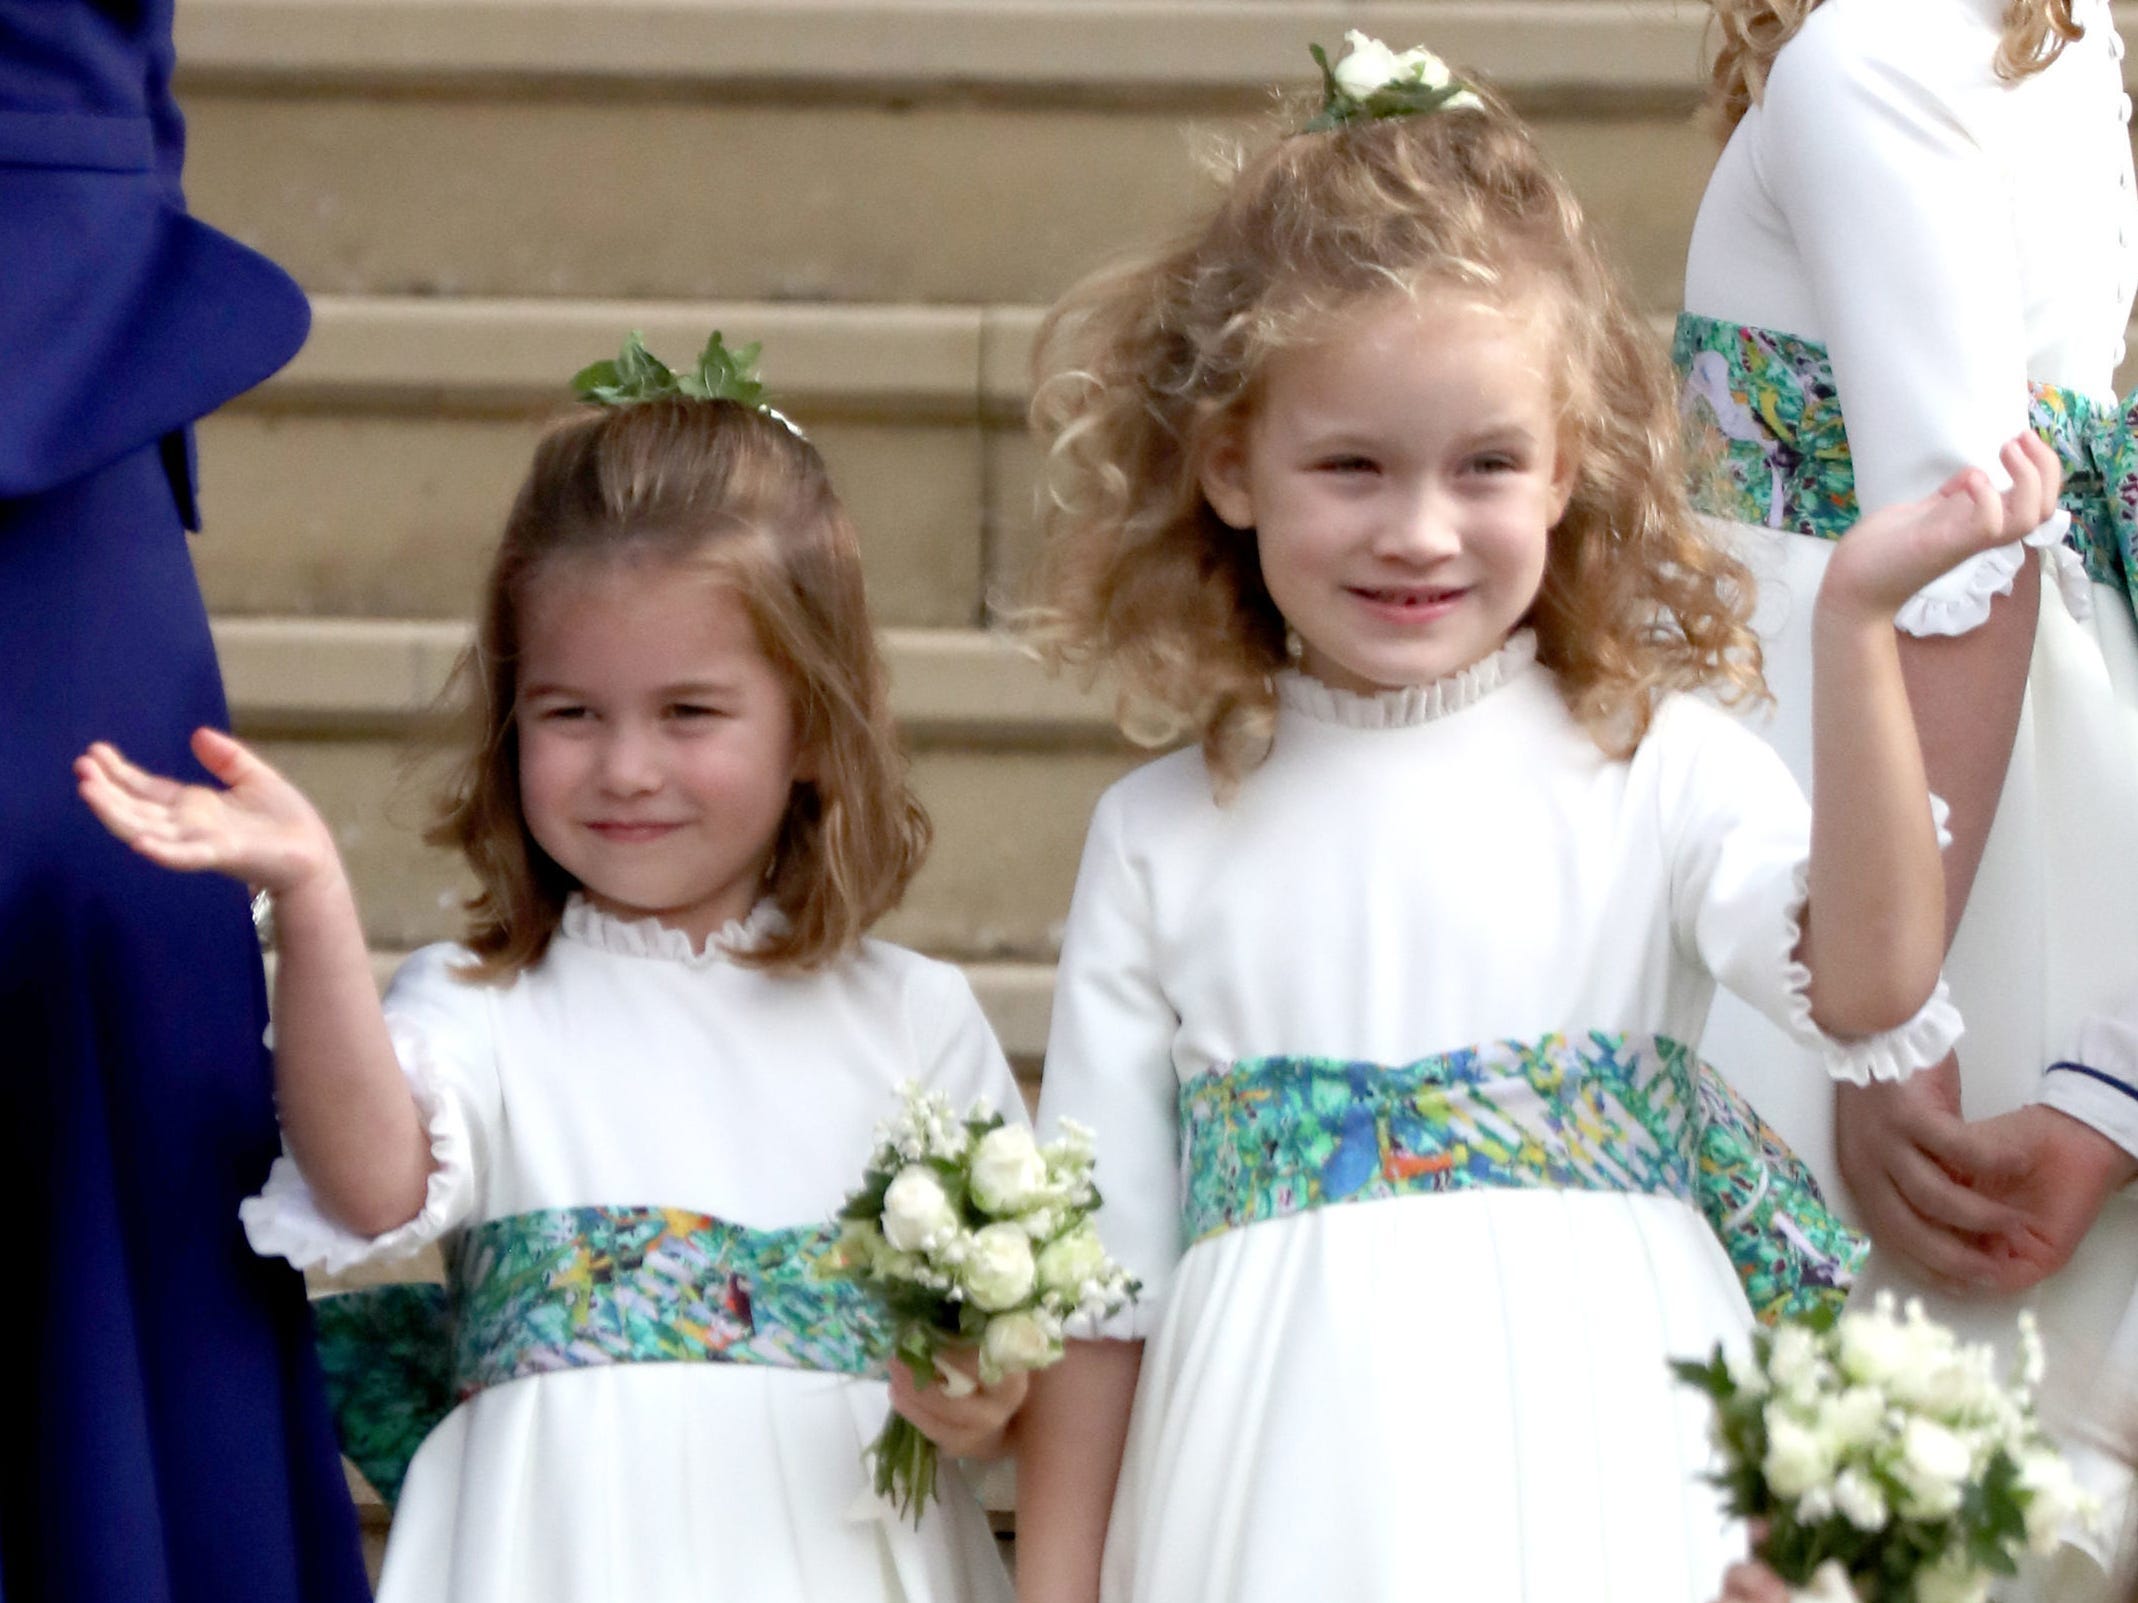 Bridesmaid Princess Charlotte of Cambridge and Maud Windsor after the wedding of Princess Eugenie of York and Jack Brooksbank at St. George's Chapel in Windsor.